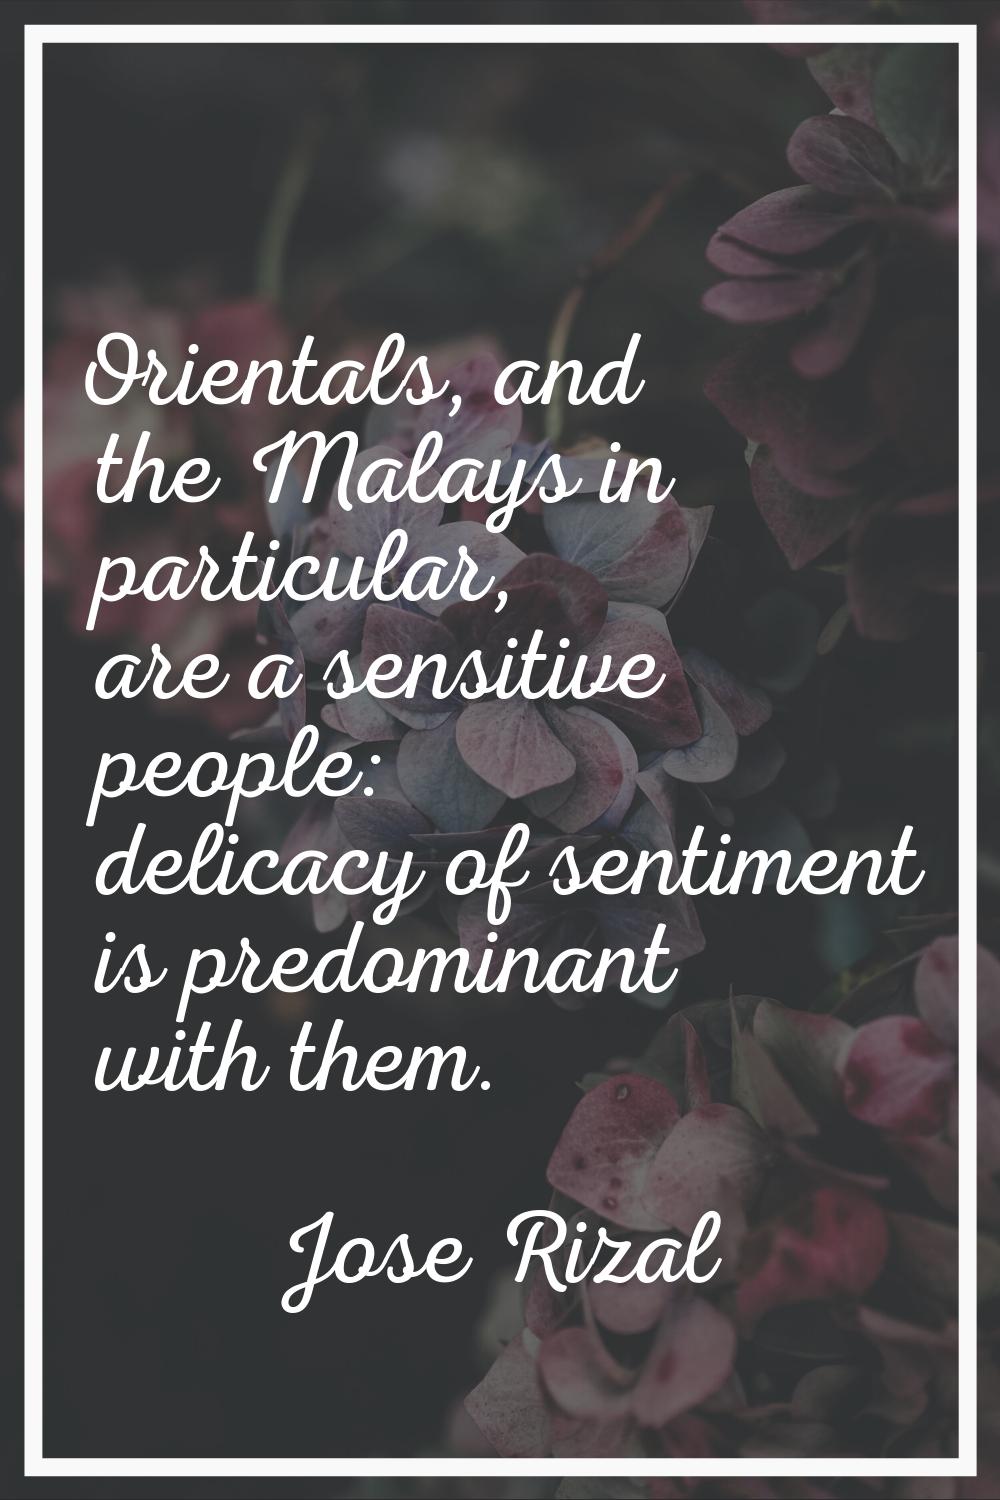 Orientals, and the Malays in particular, are a sensitive people: delicacy of sentiment is predomina